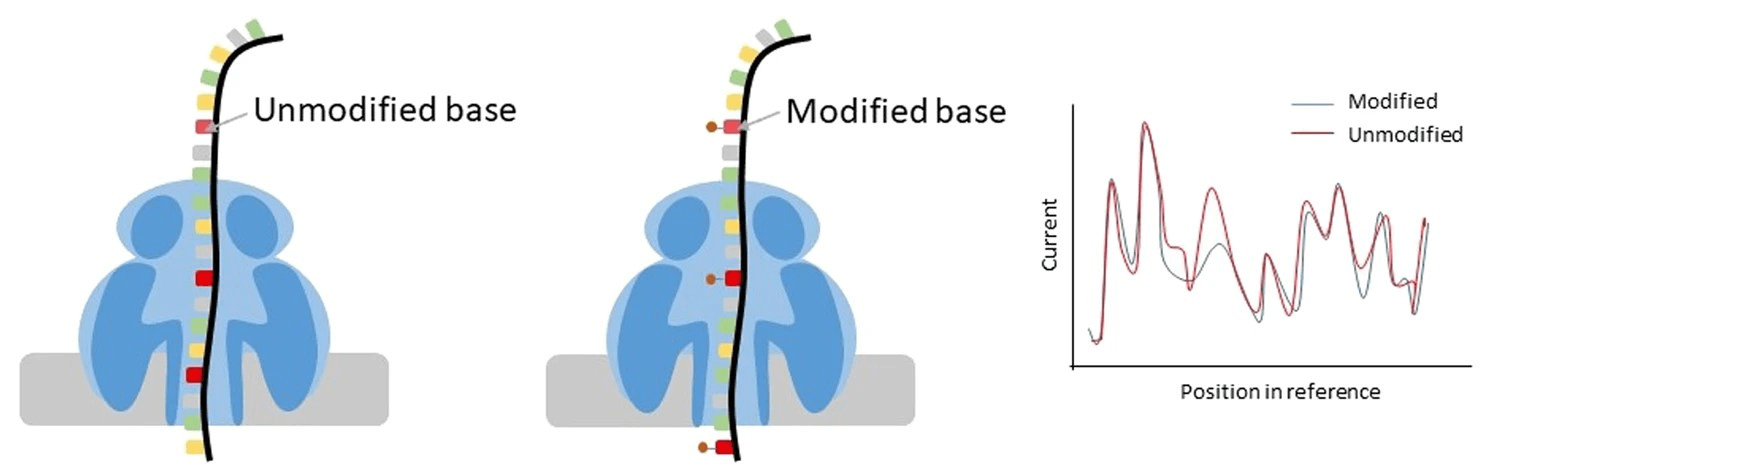 Using Nanopore sequencing to detect modified bases (DNA or RNA) using a difference in current.